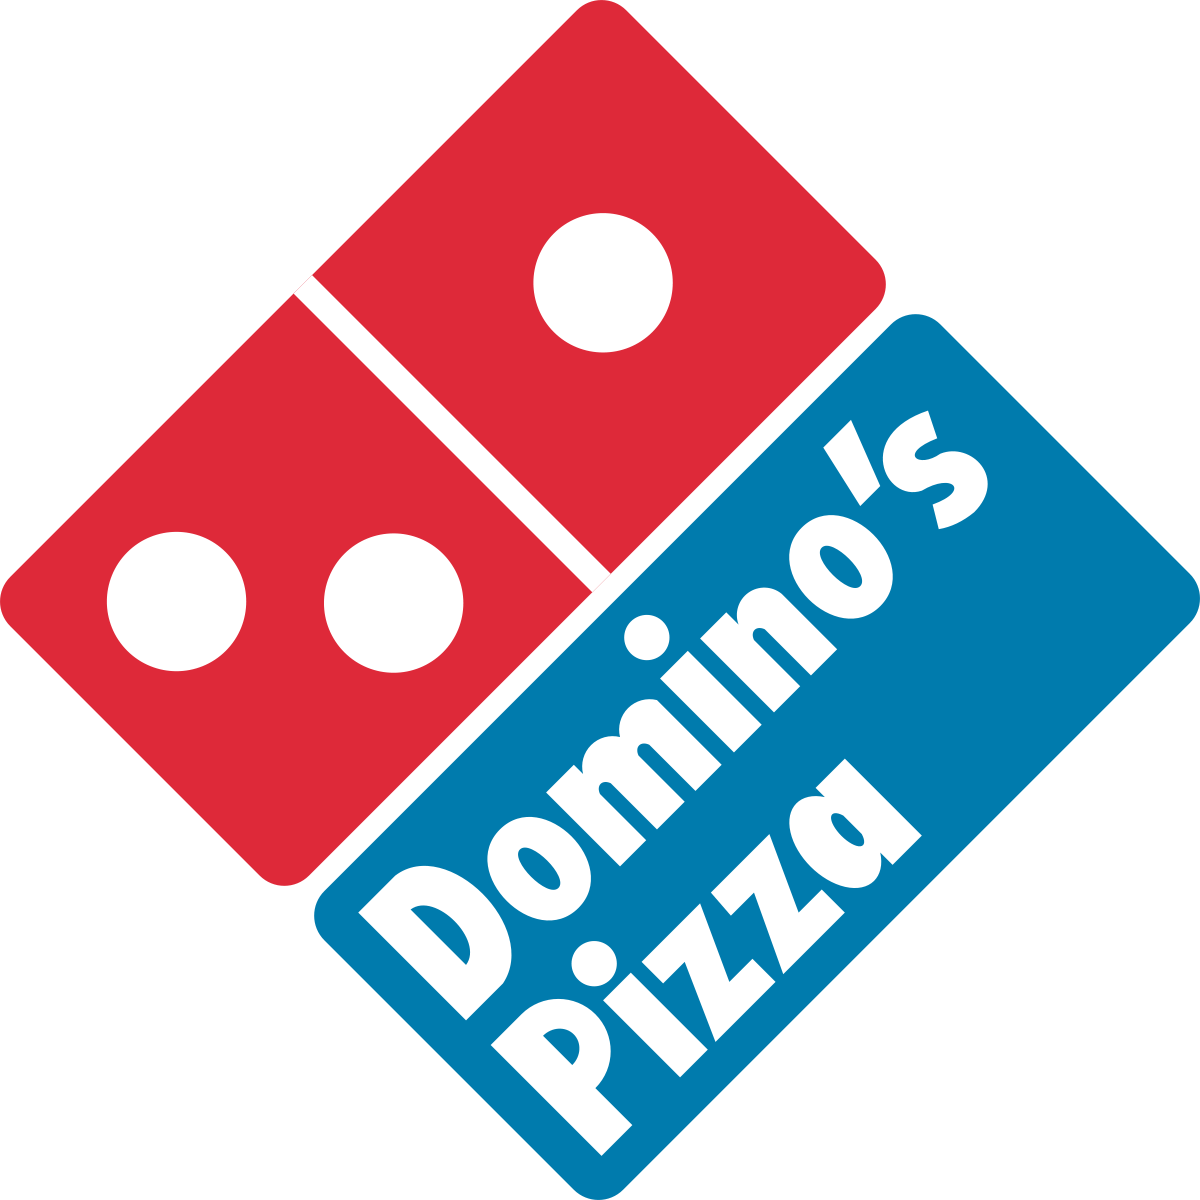 1200px-Dominos_pizza_logo.svg.png